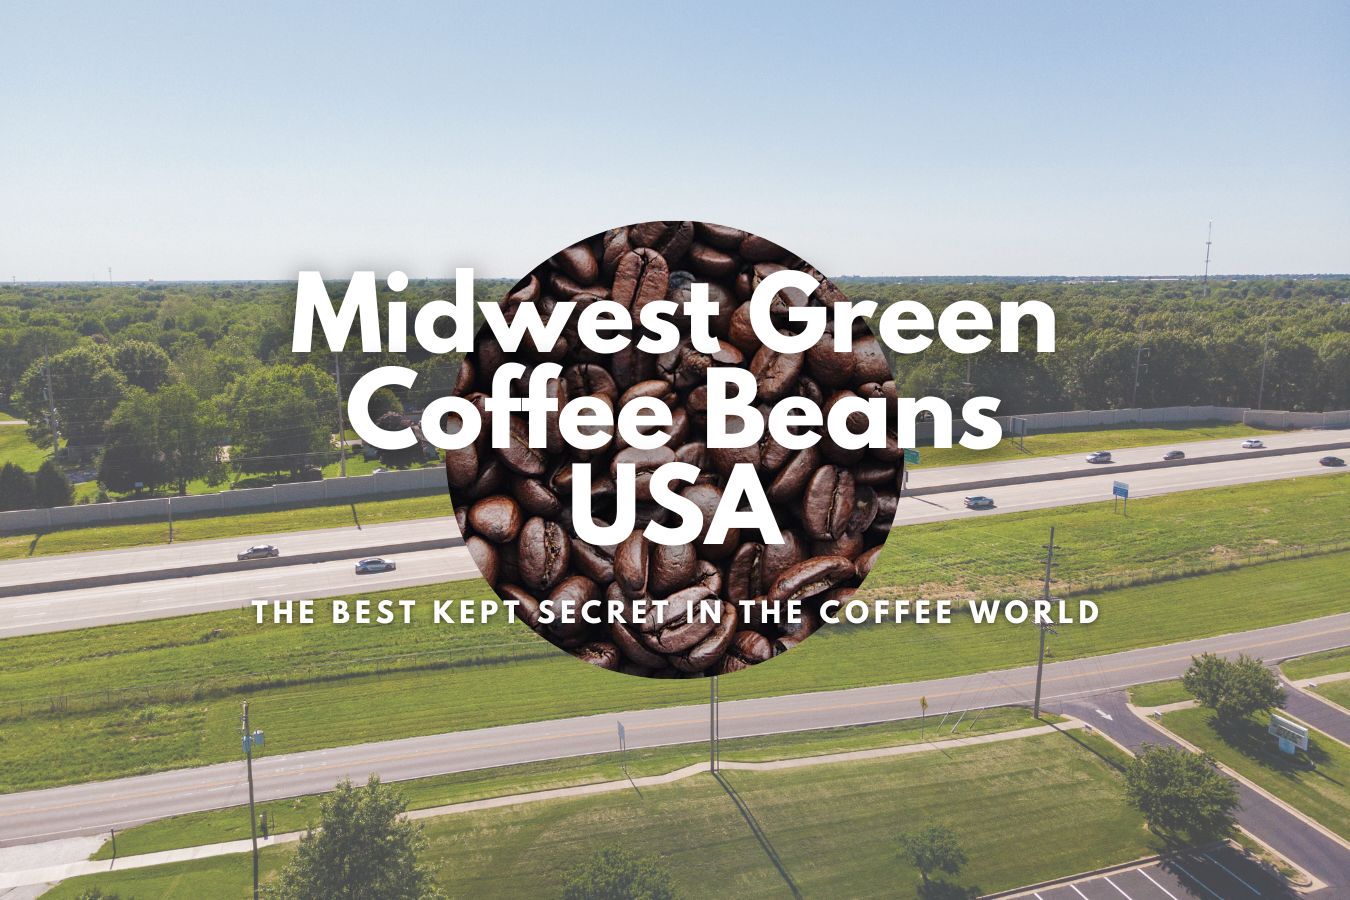 Midwest Green Coffee Beans USA The Best Kept Secret in the Coffee World